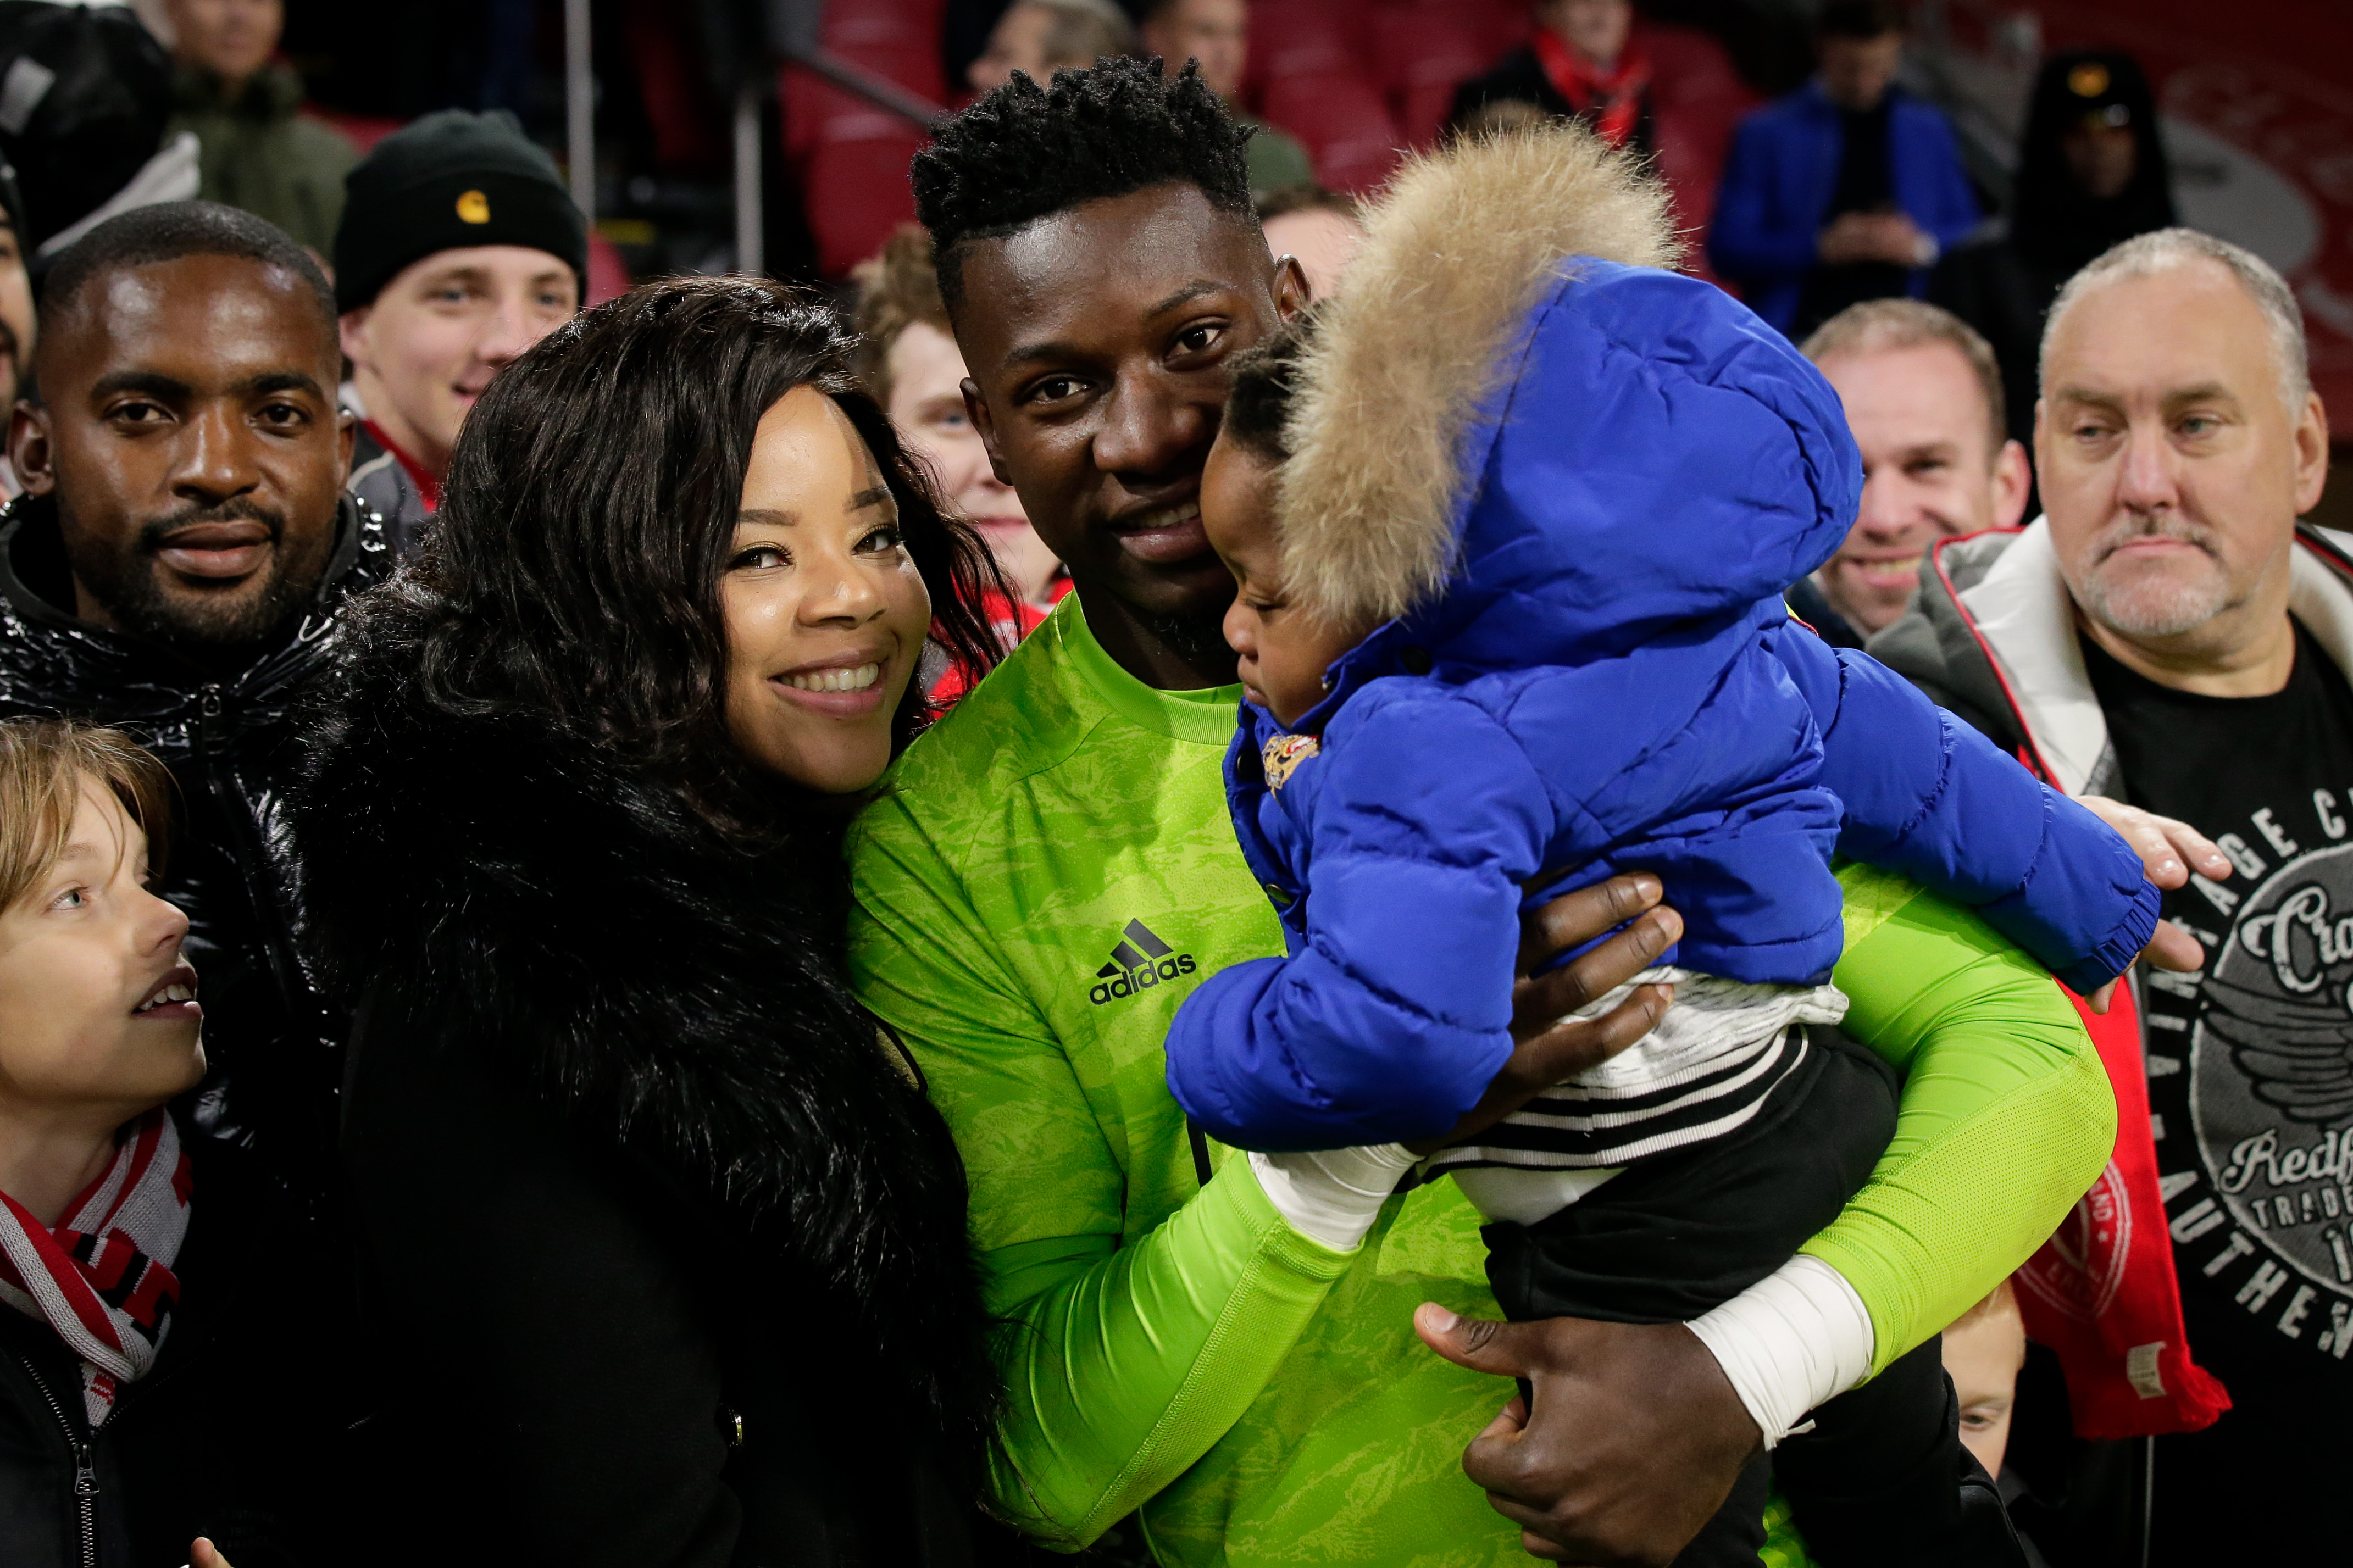 Ajax keeper Andre Onana banned for 12 months for doping violation after  'mistakenly taking wife's medicine' | The Sun